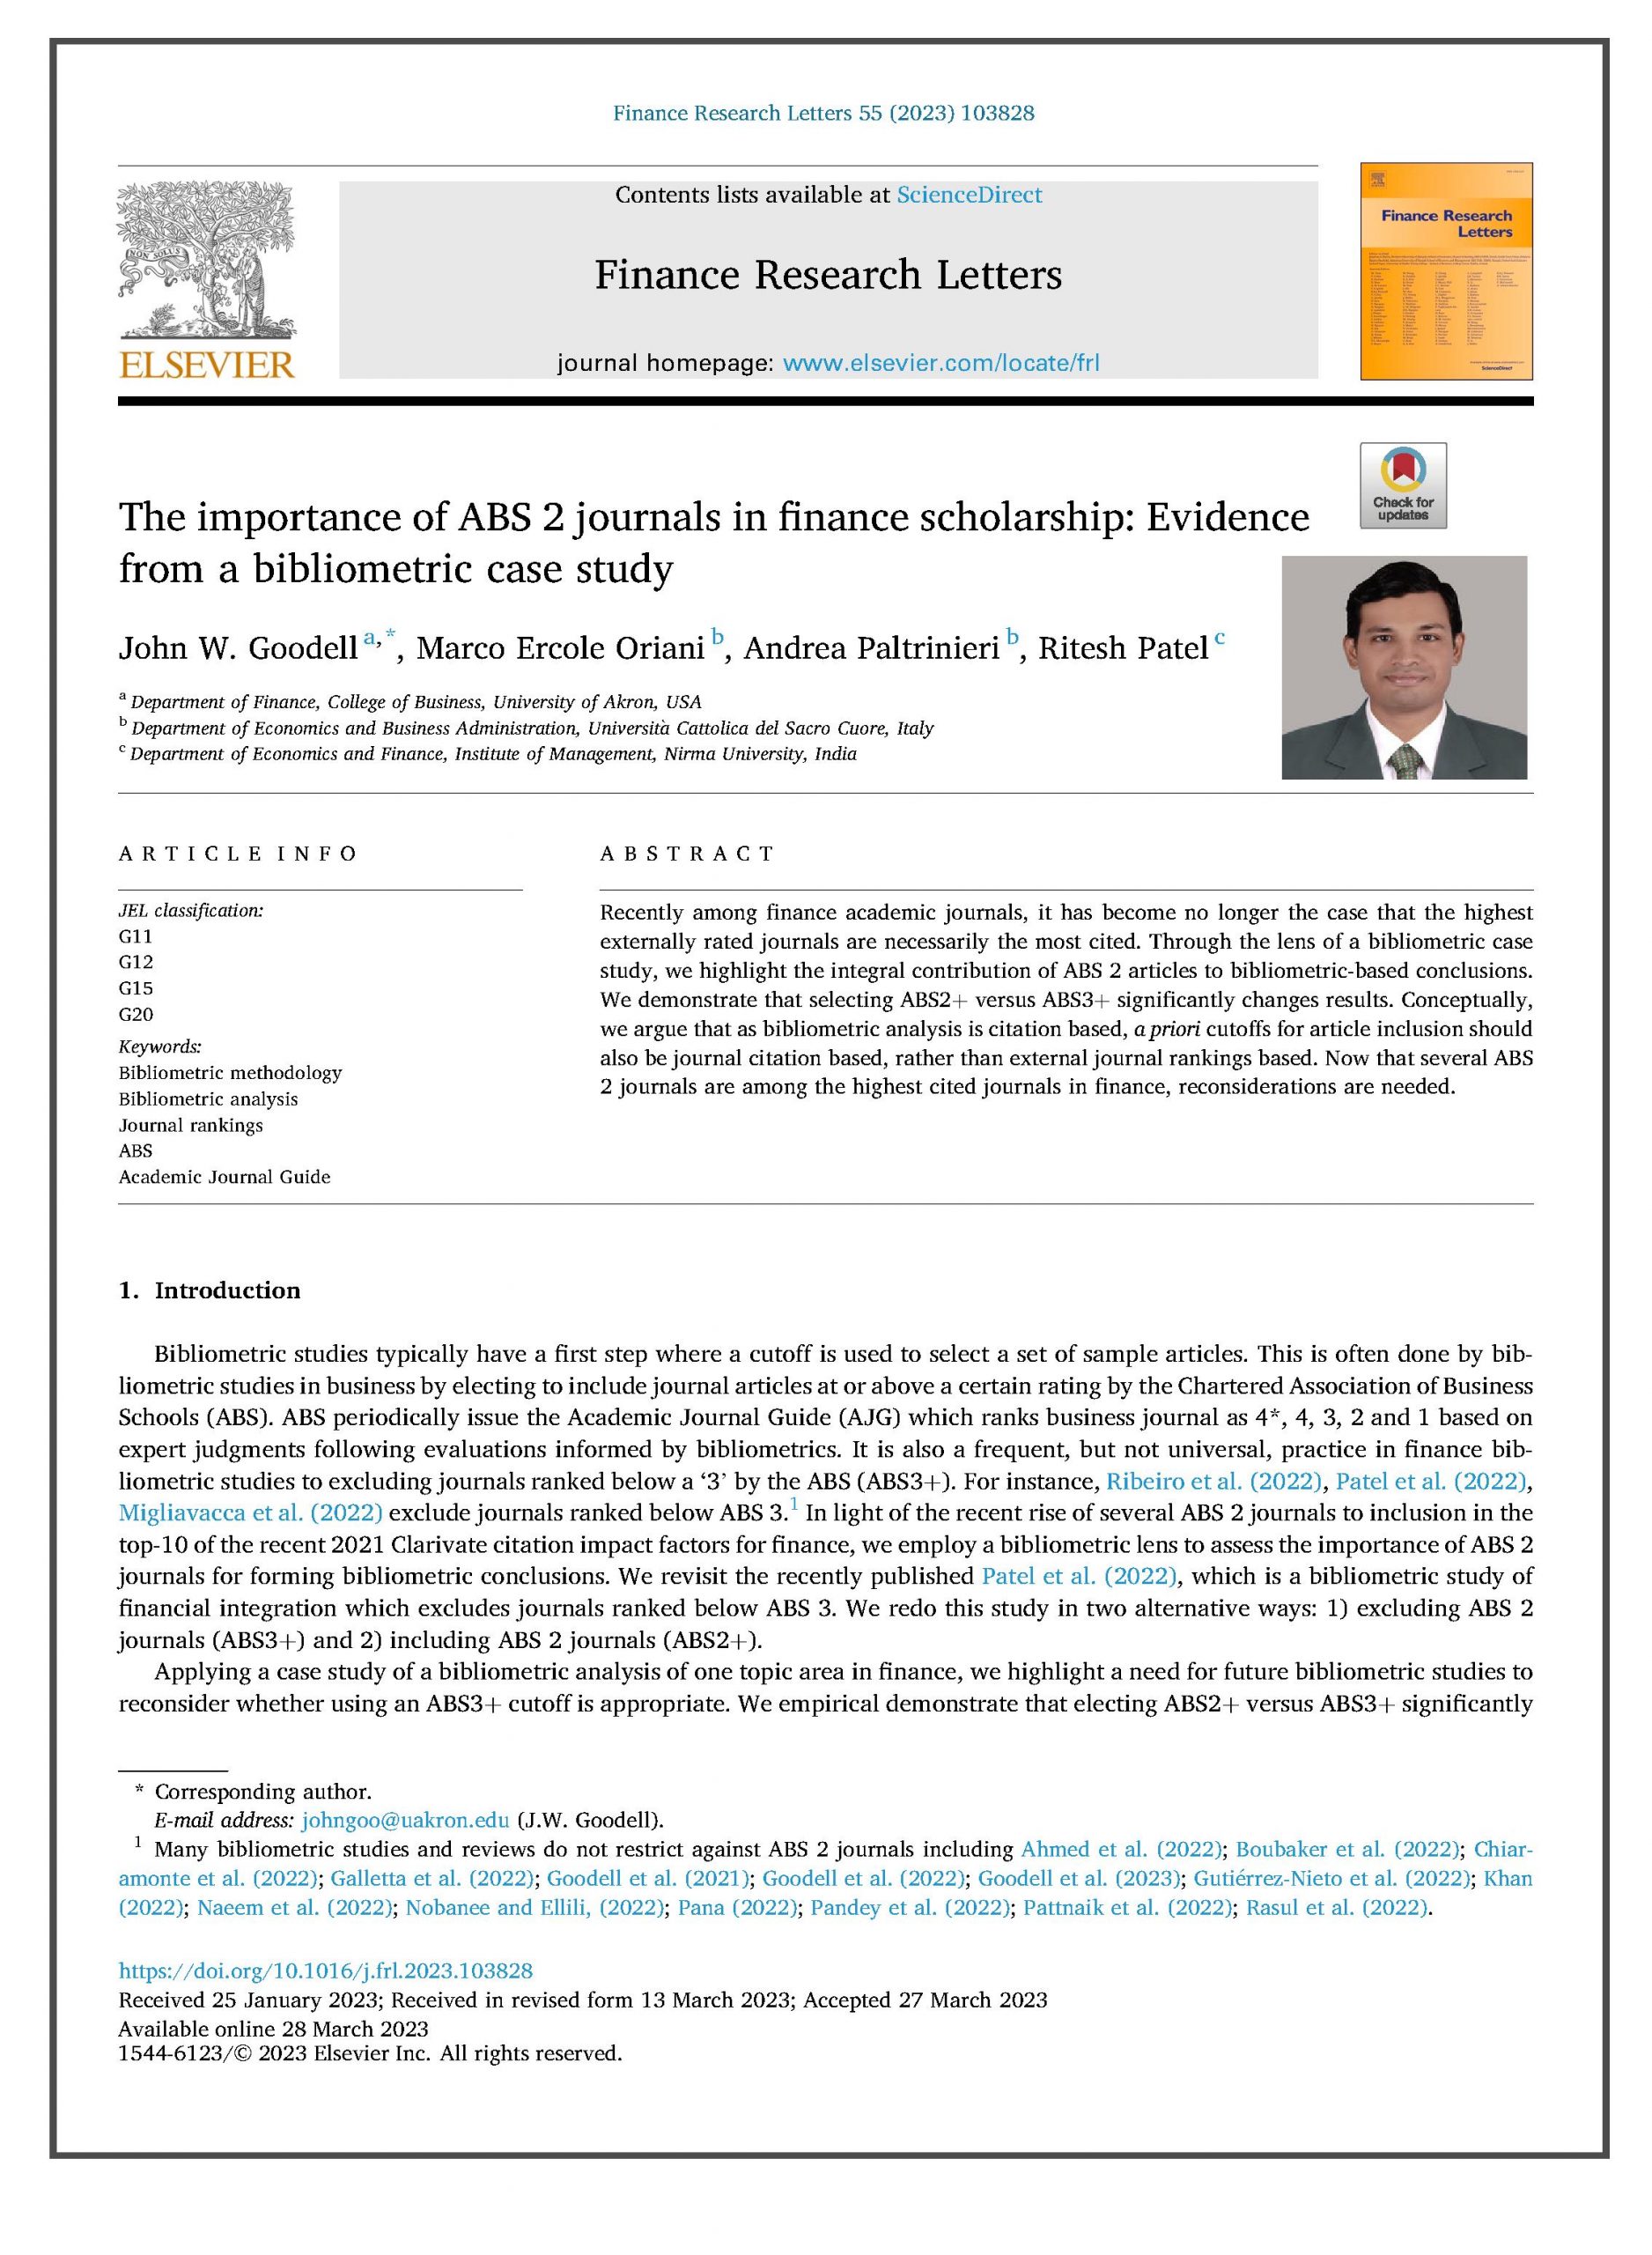 The importance of ABS 2 journals in finance scholarship: Evidence from a bibliometric case study